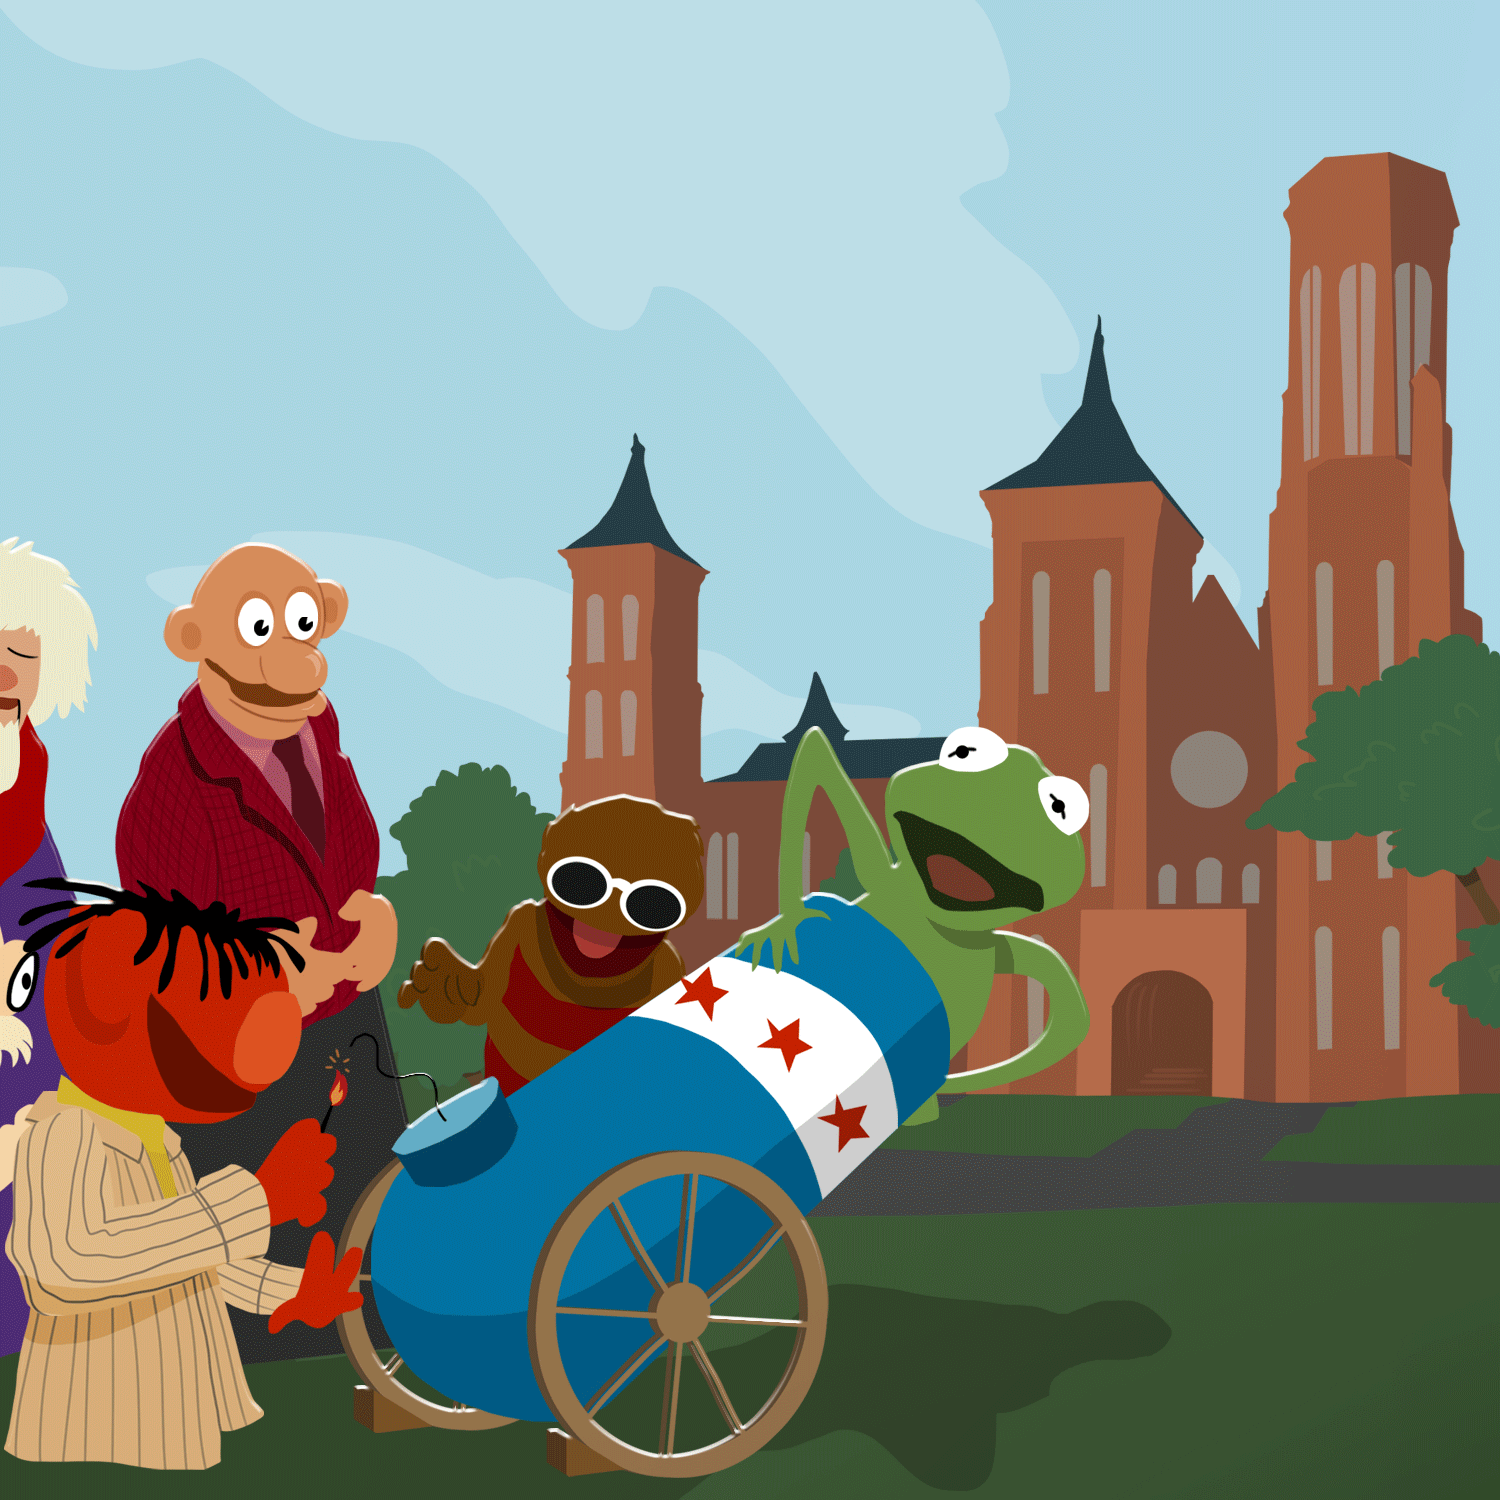 The 'Gentle Anarchy' of the Muppets